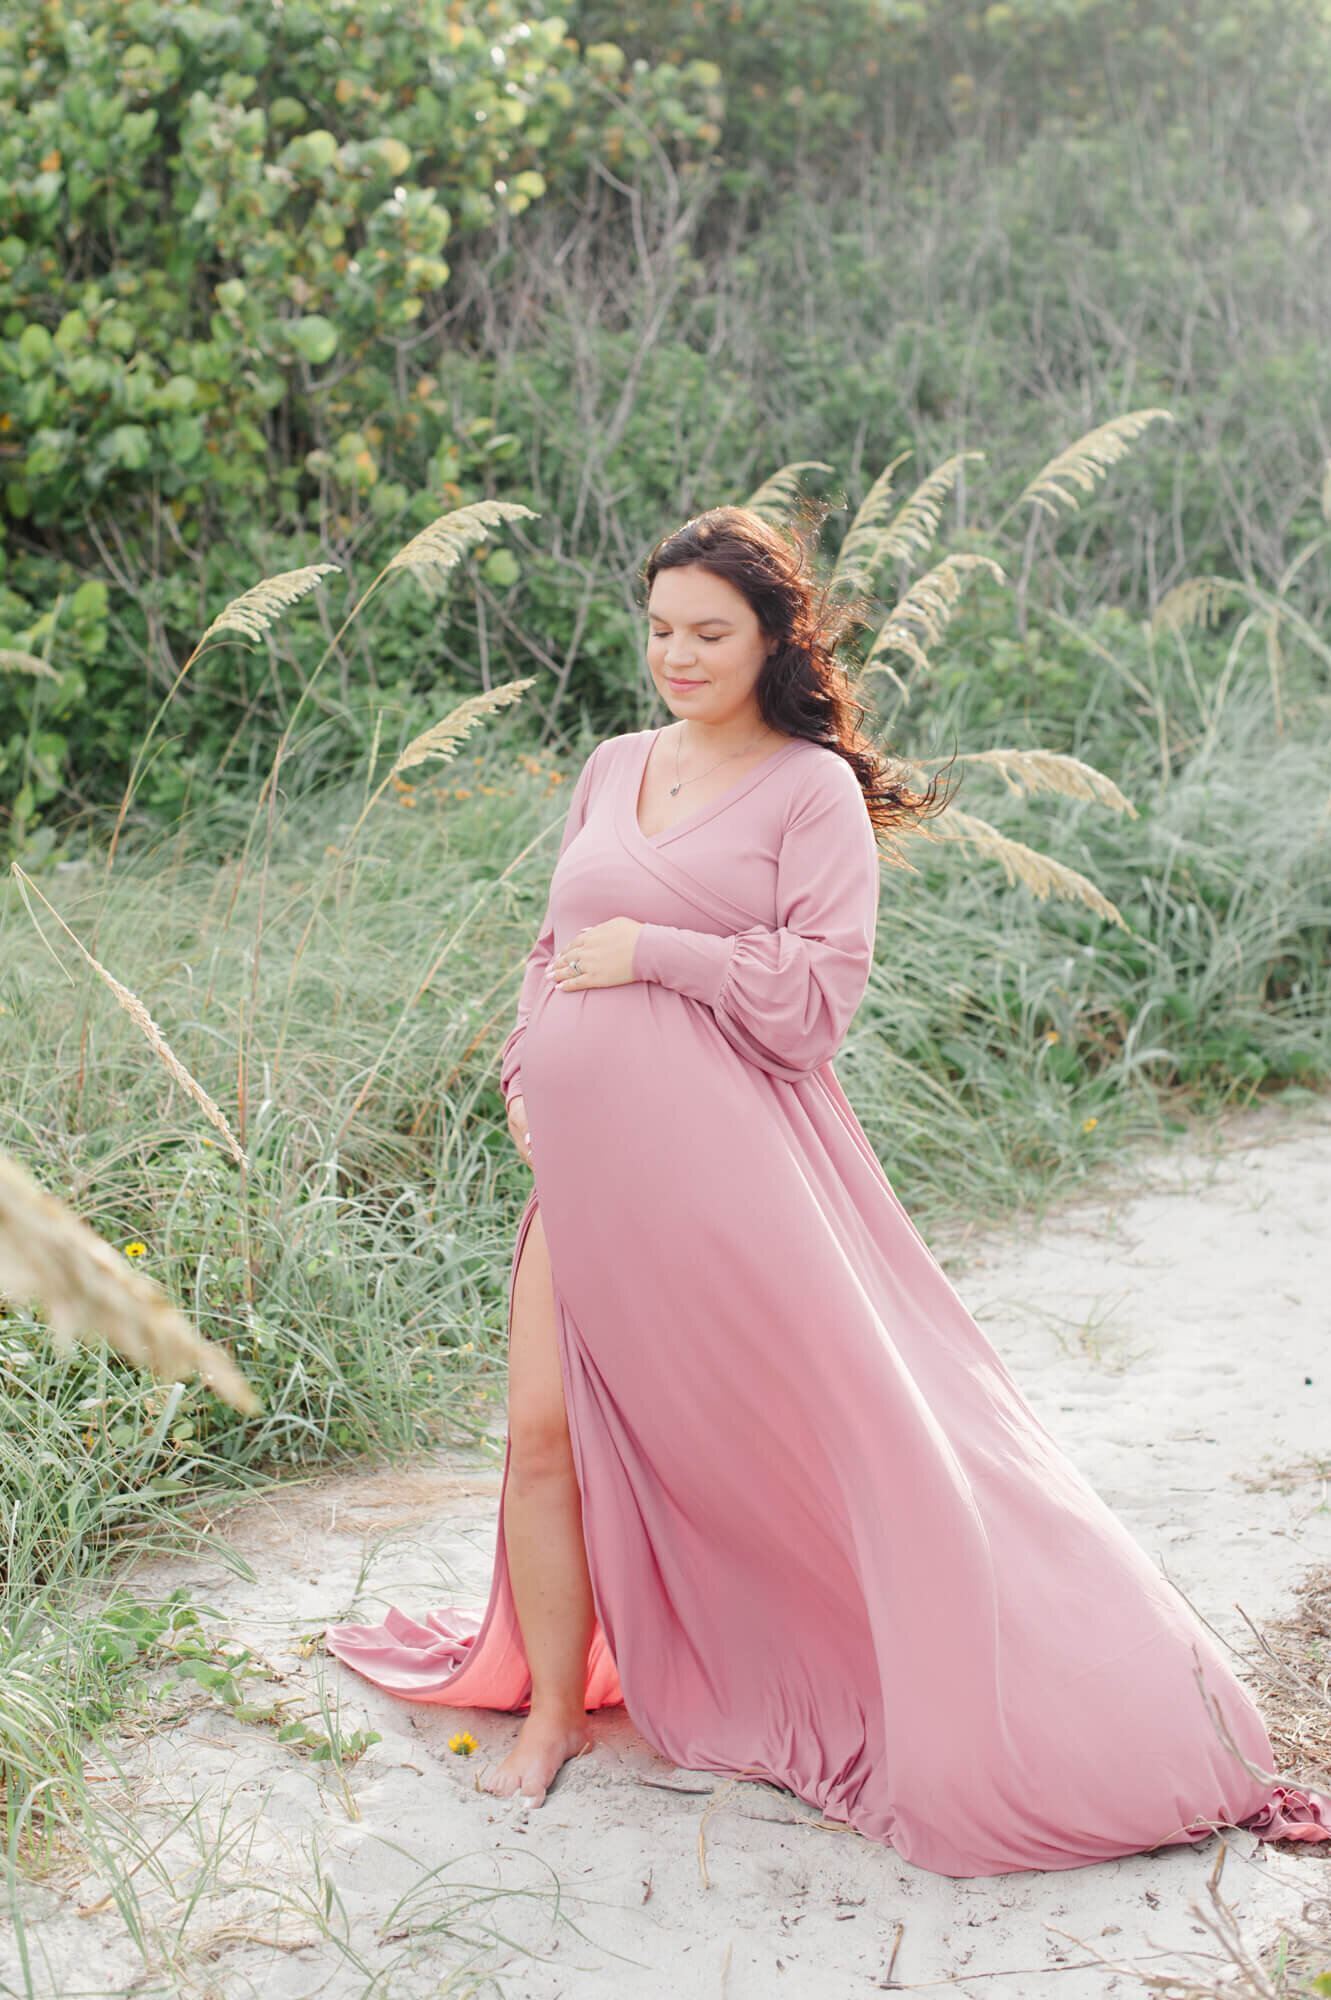 Mom standing near the dunes in a gorgeous pink gown holding her belly during her maternity photoshoot